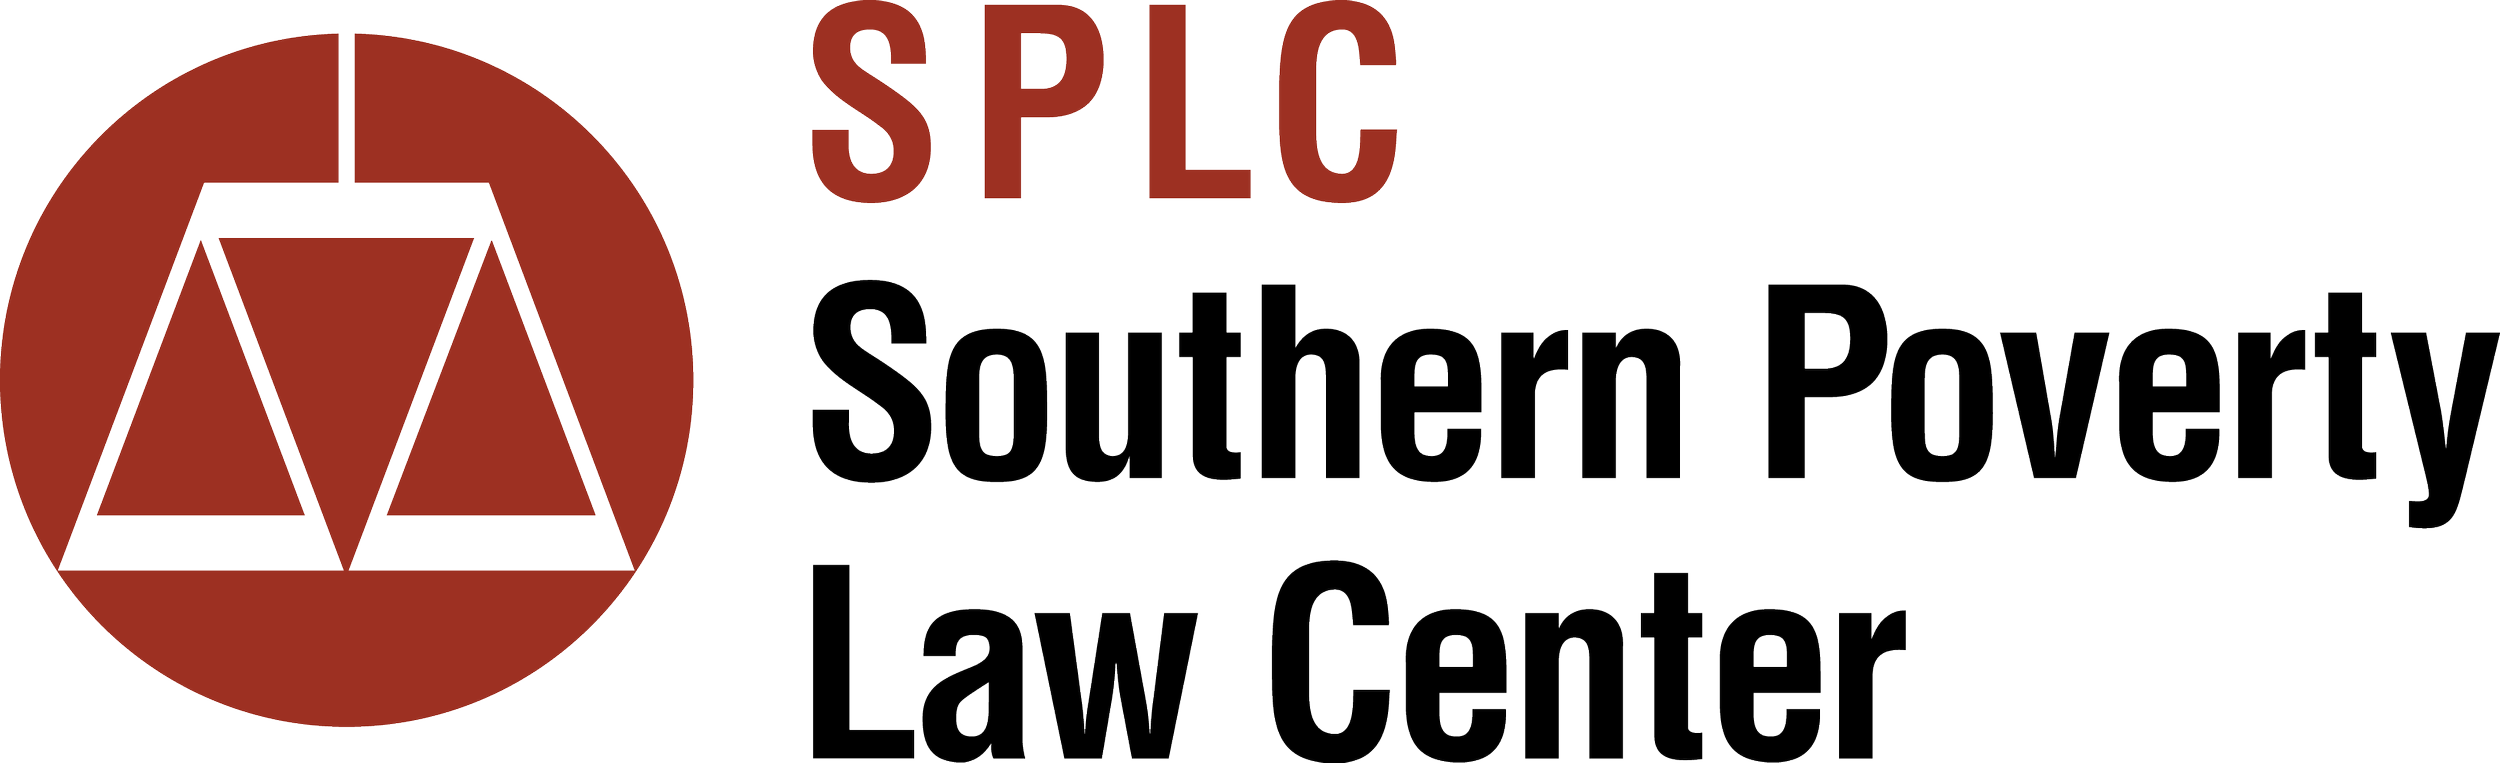 splc_logo_web_stacked.png